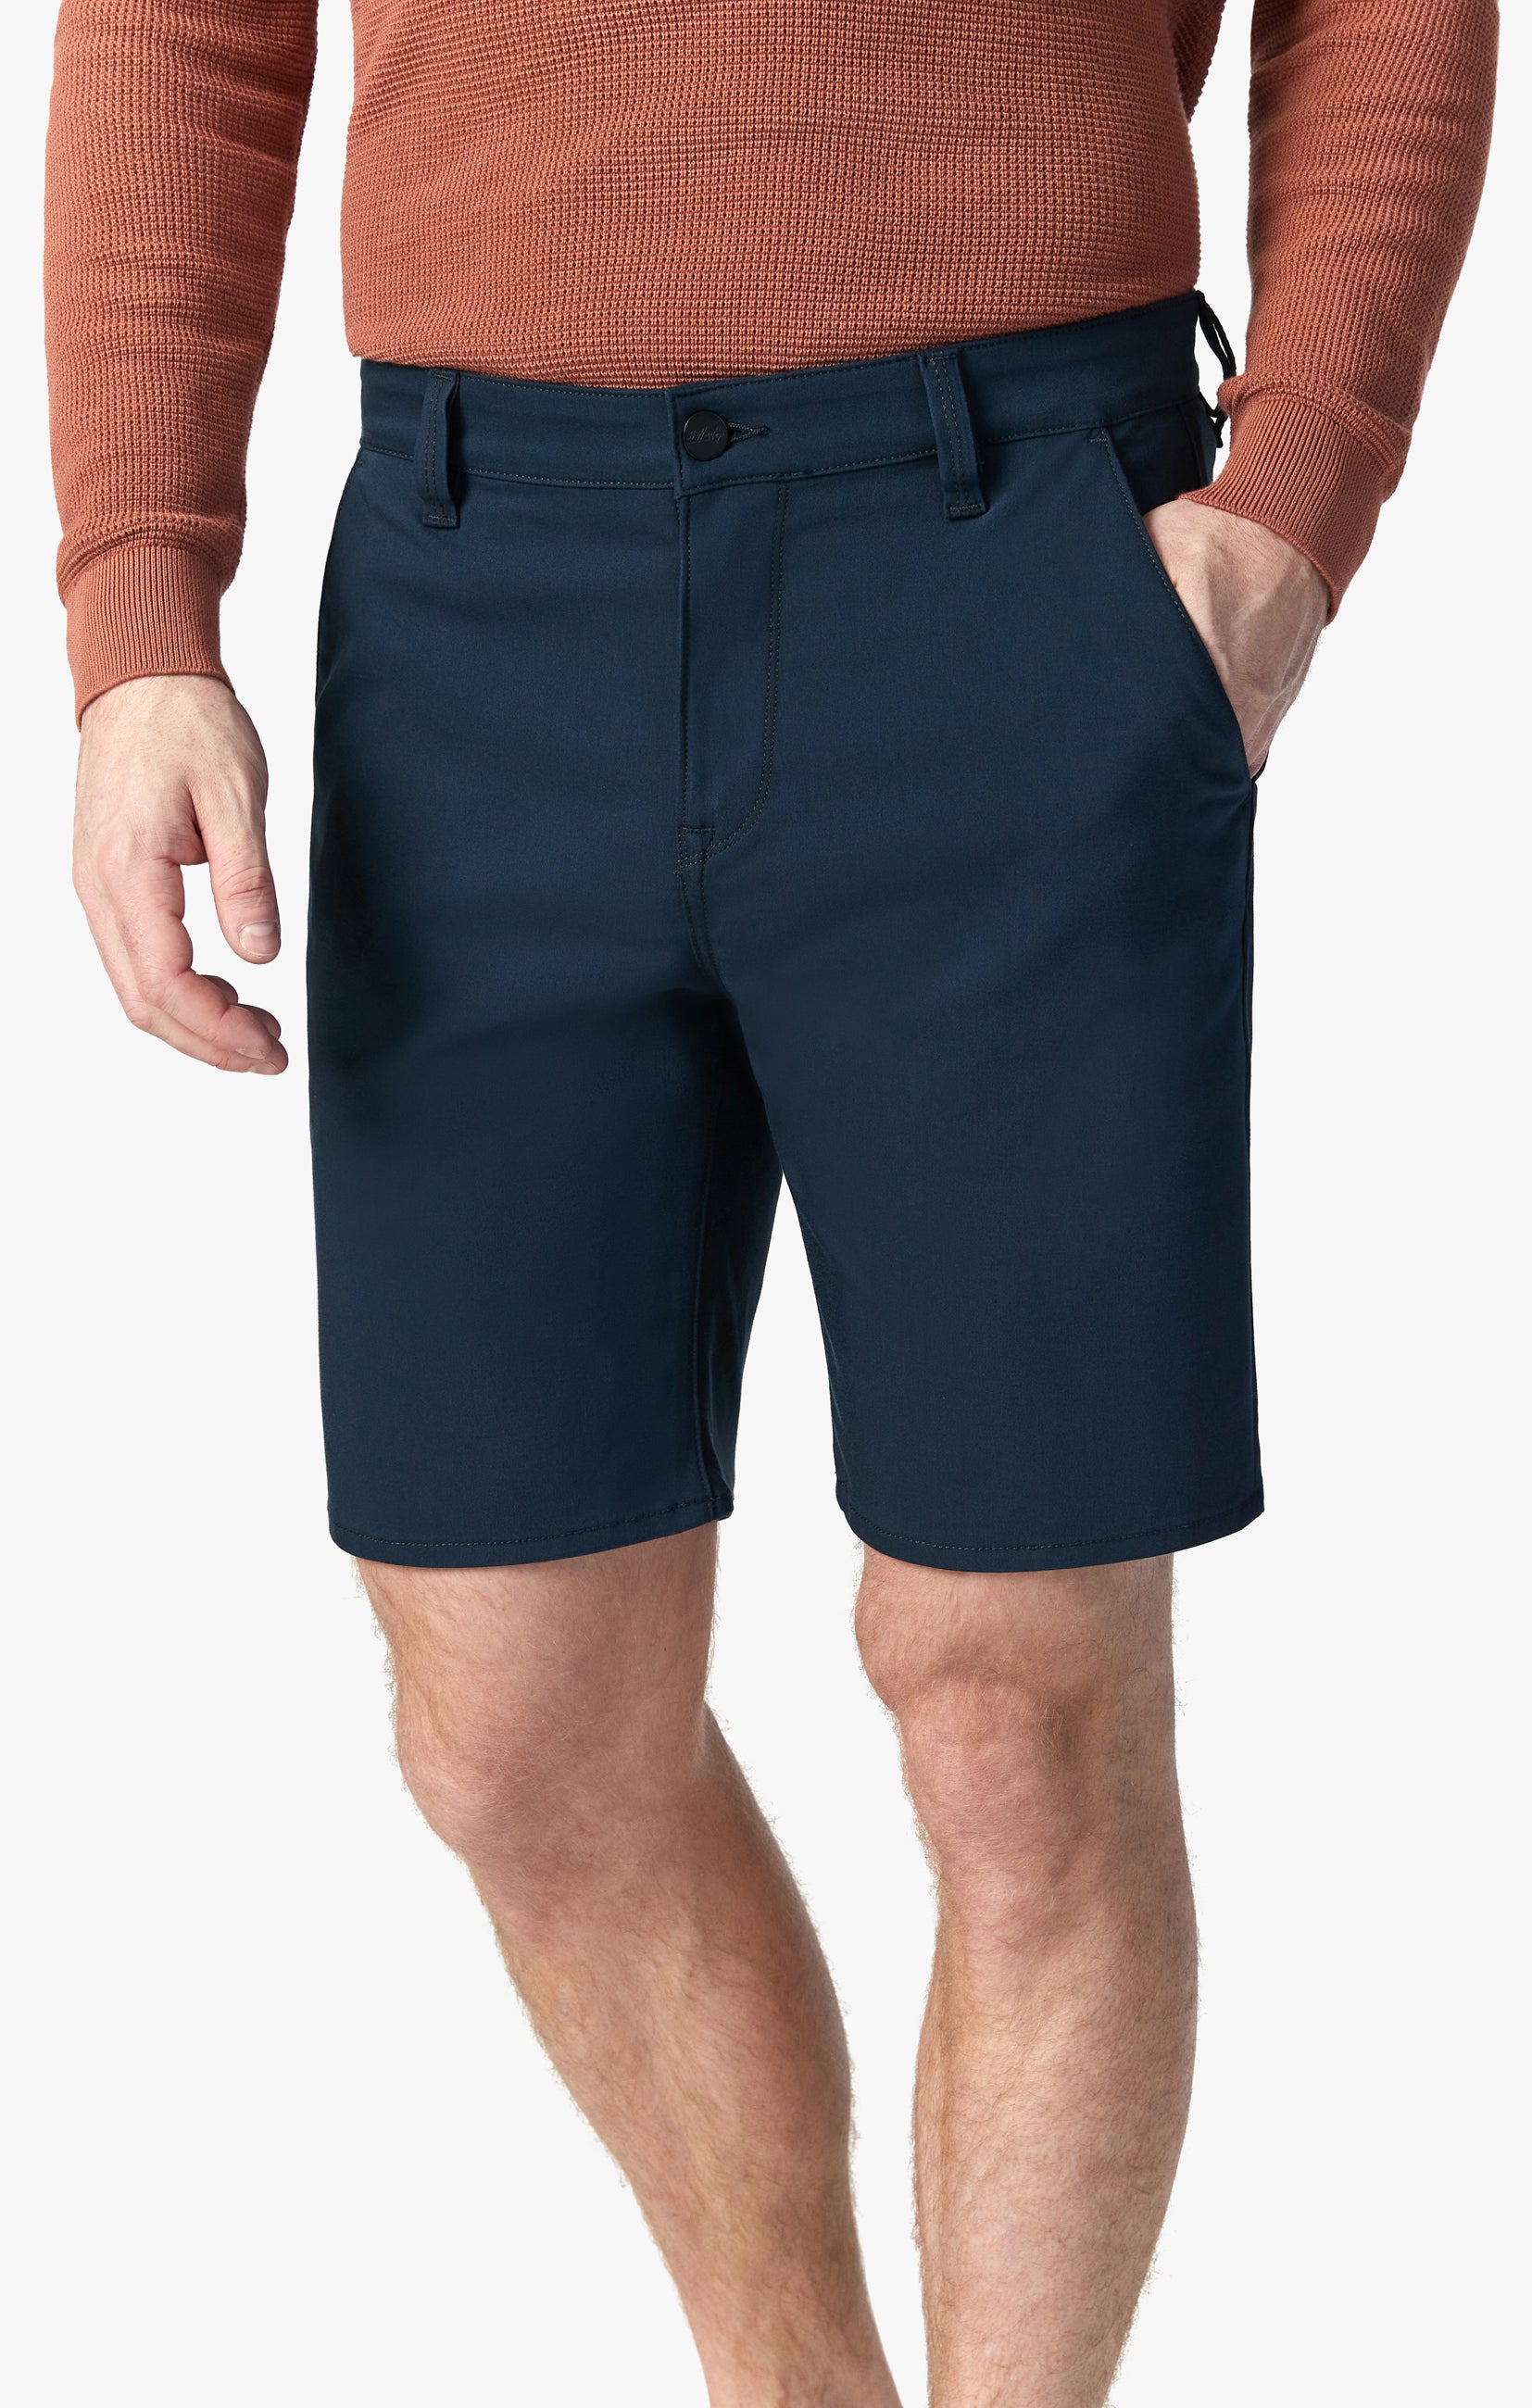 Como Shorts in Navy Commuter Image 6